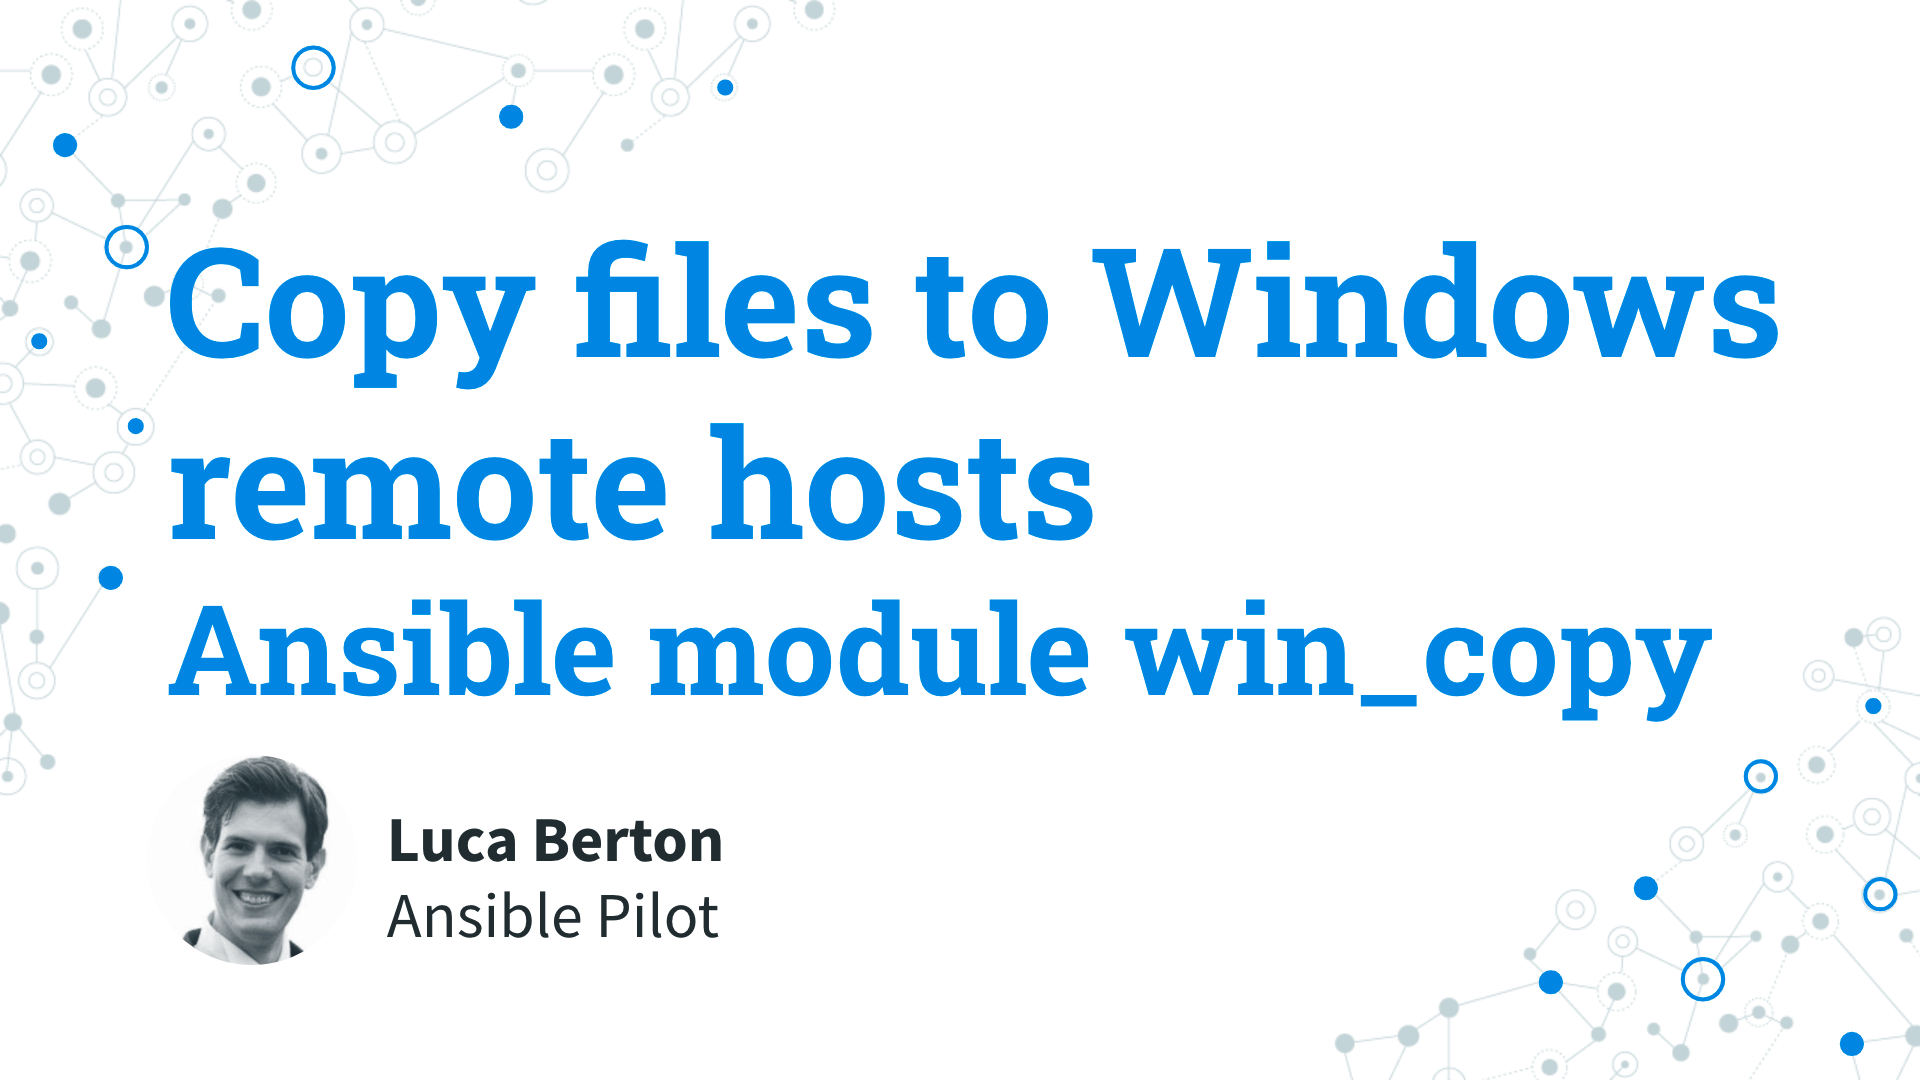 Copy files to Windows remote hosts - Local to Remote - Ansible module win_copy